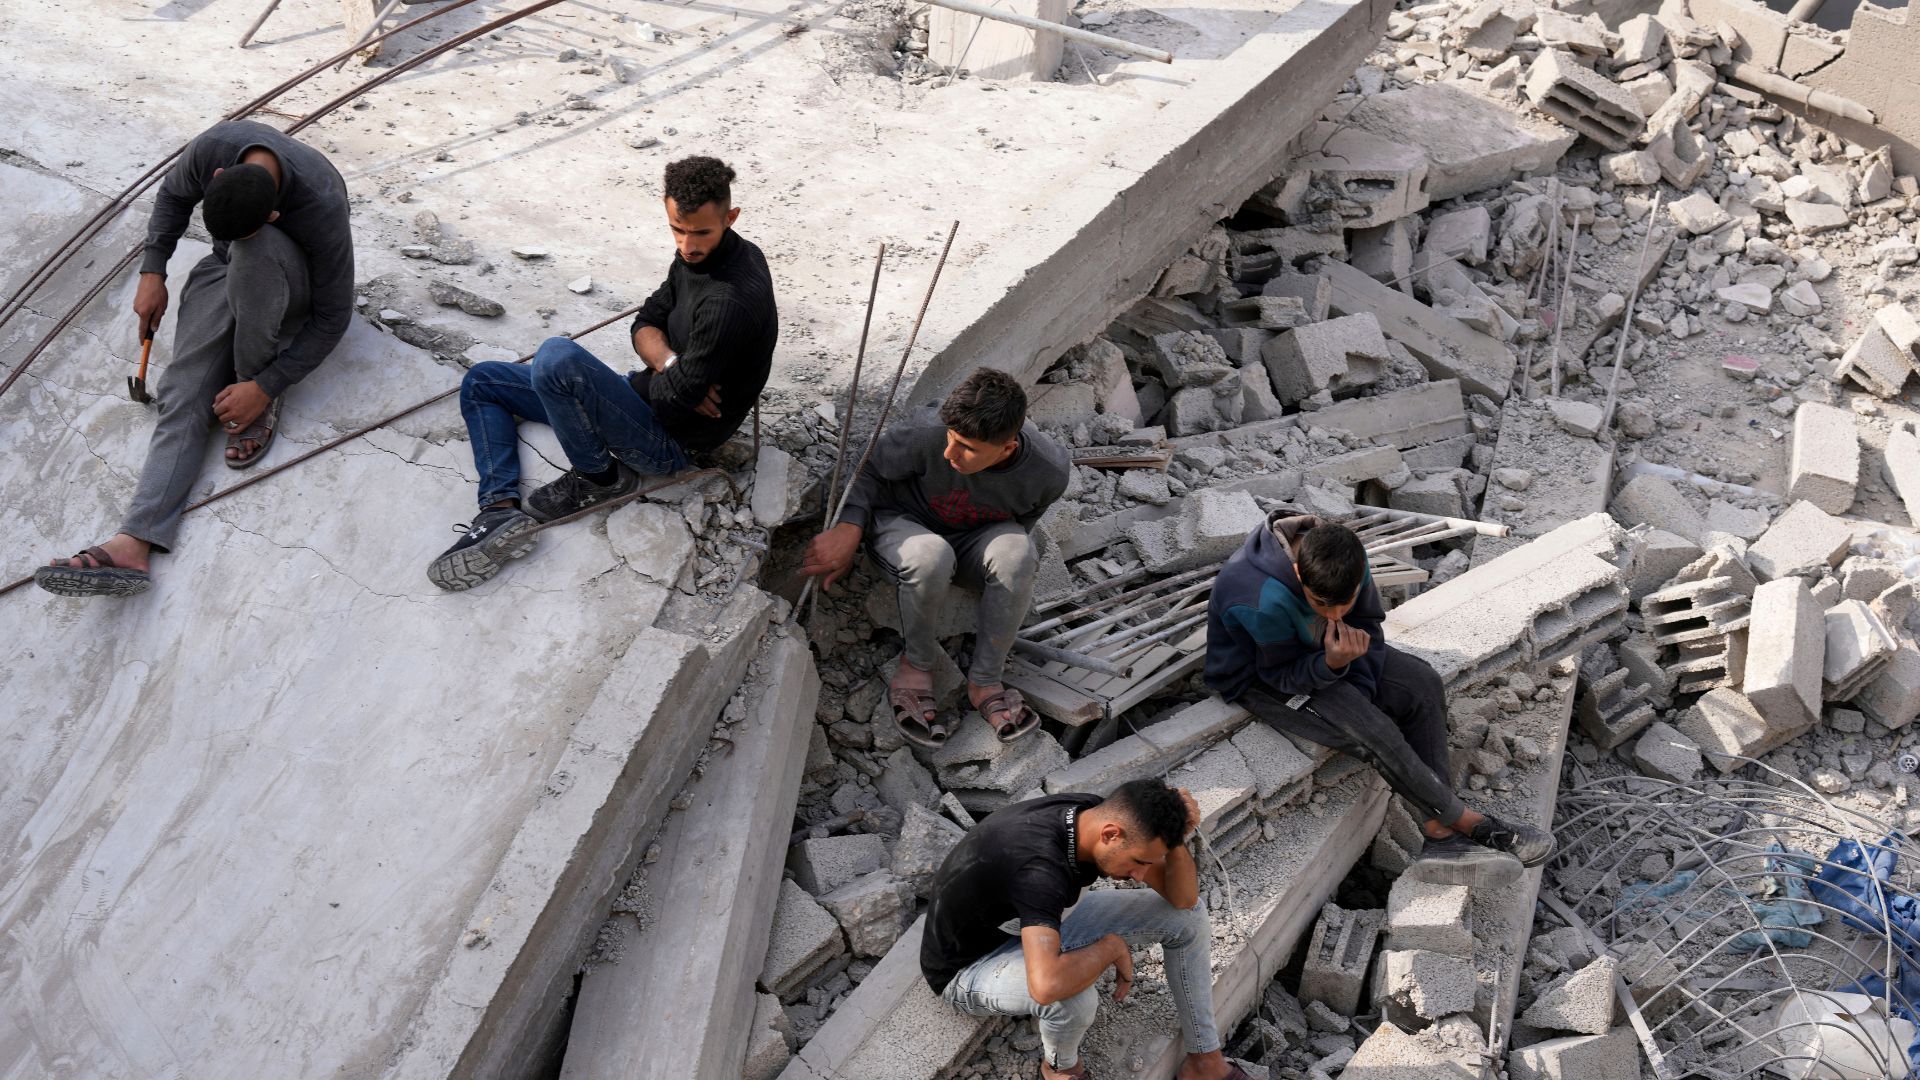 Can the UN do anything to stop Israel’s assault on Gaza? #stop #Israels #assault #Gaza